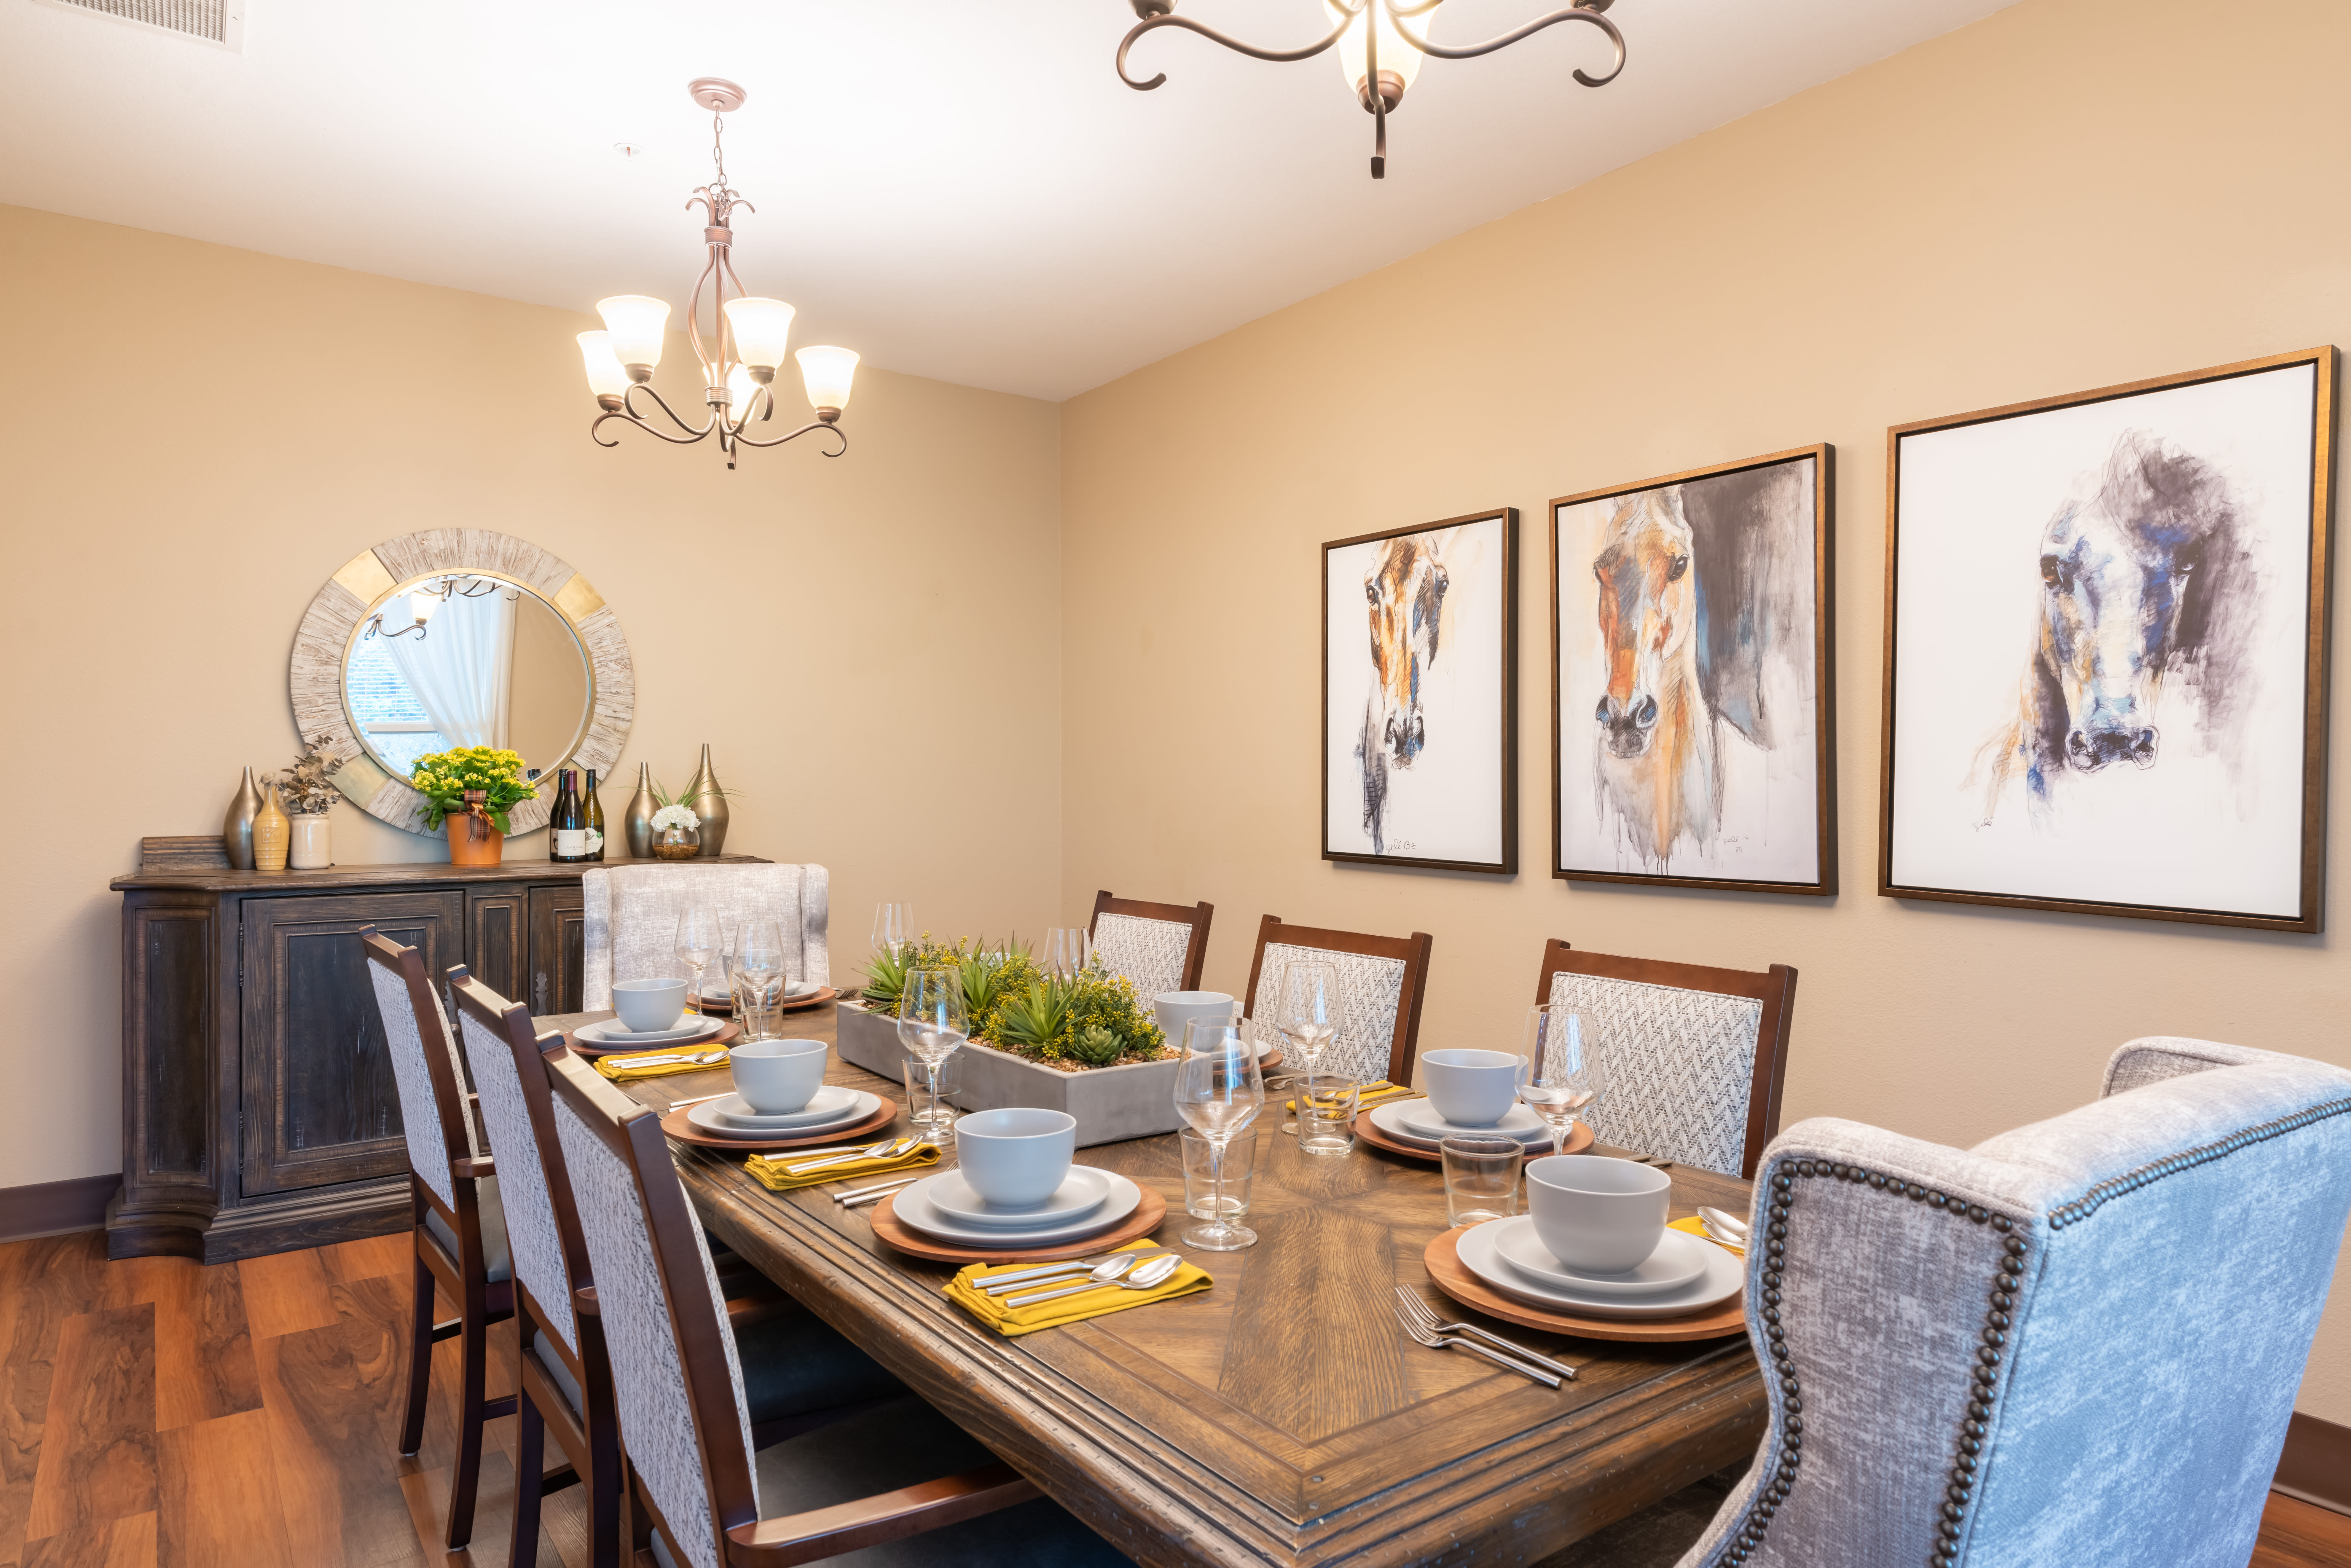 Dining Area with dining table and chairs at Heron Pointe Senior Living in Monmouth, Oregon